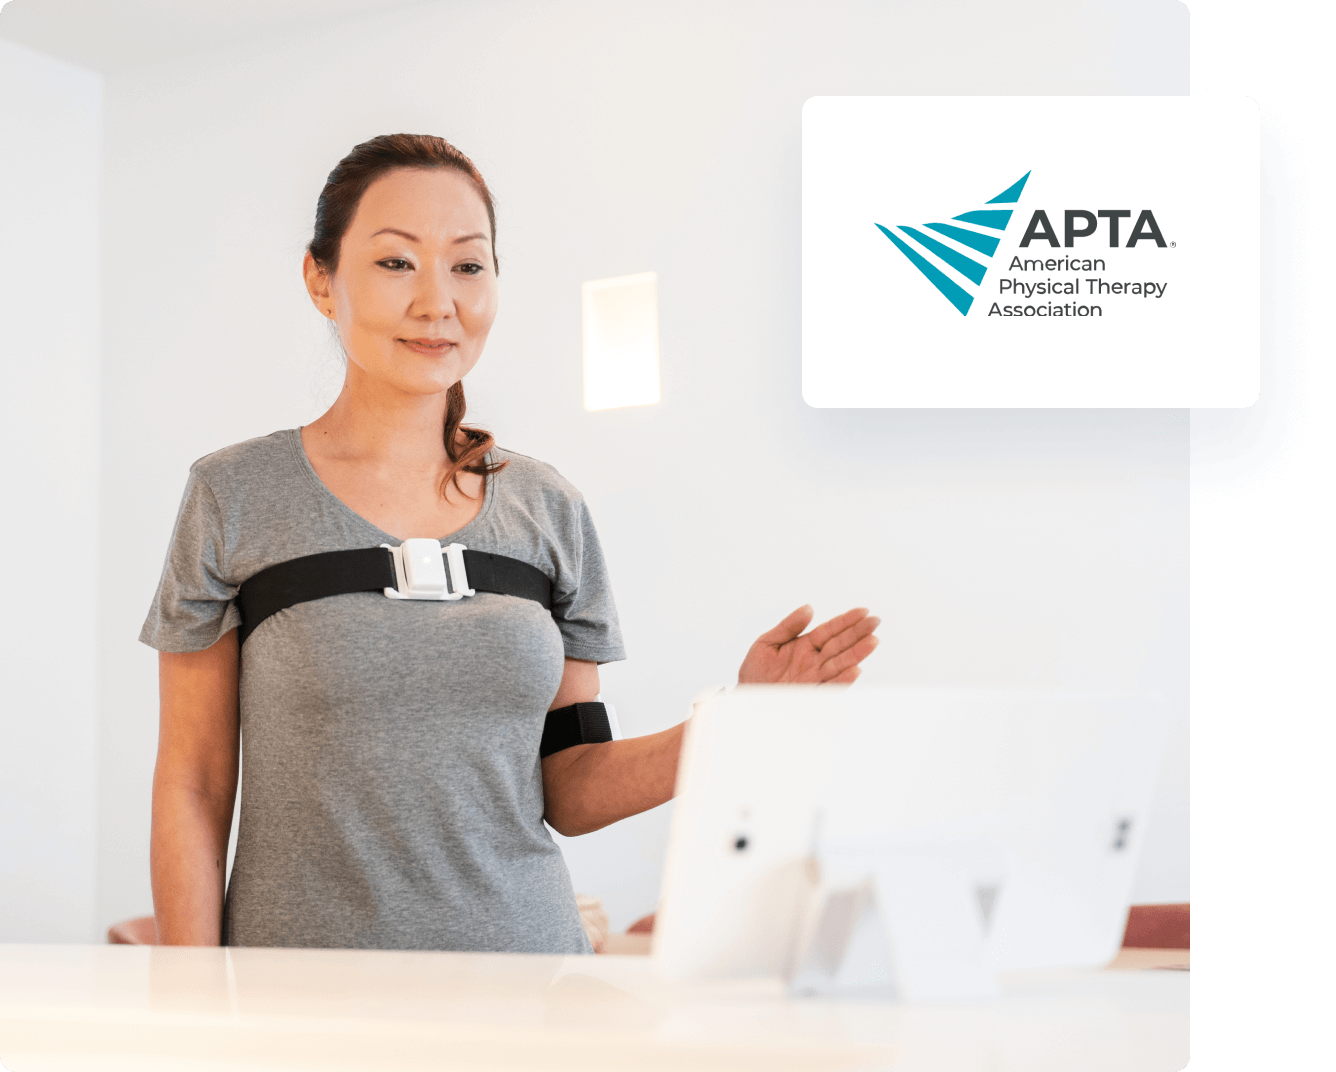 Partners with the American Physical Therapy Association (APTA)